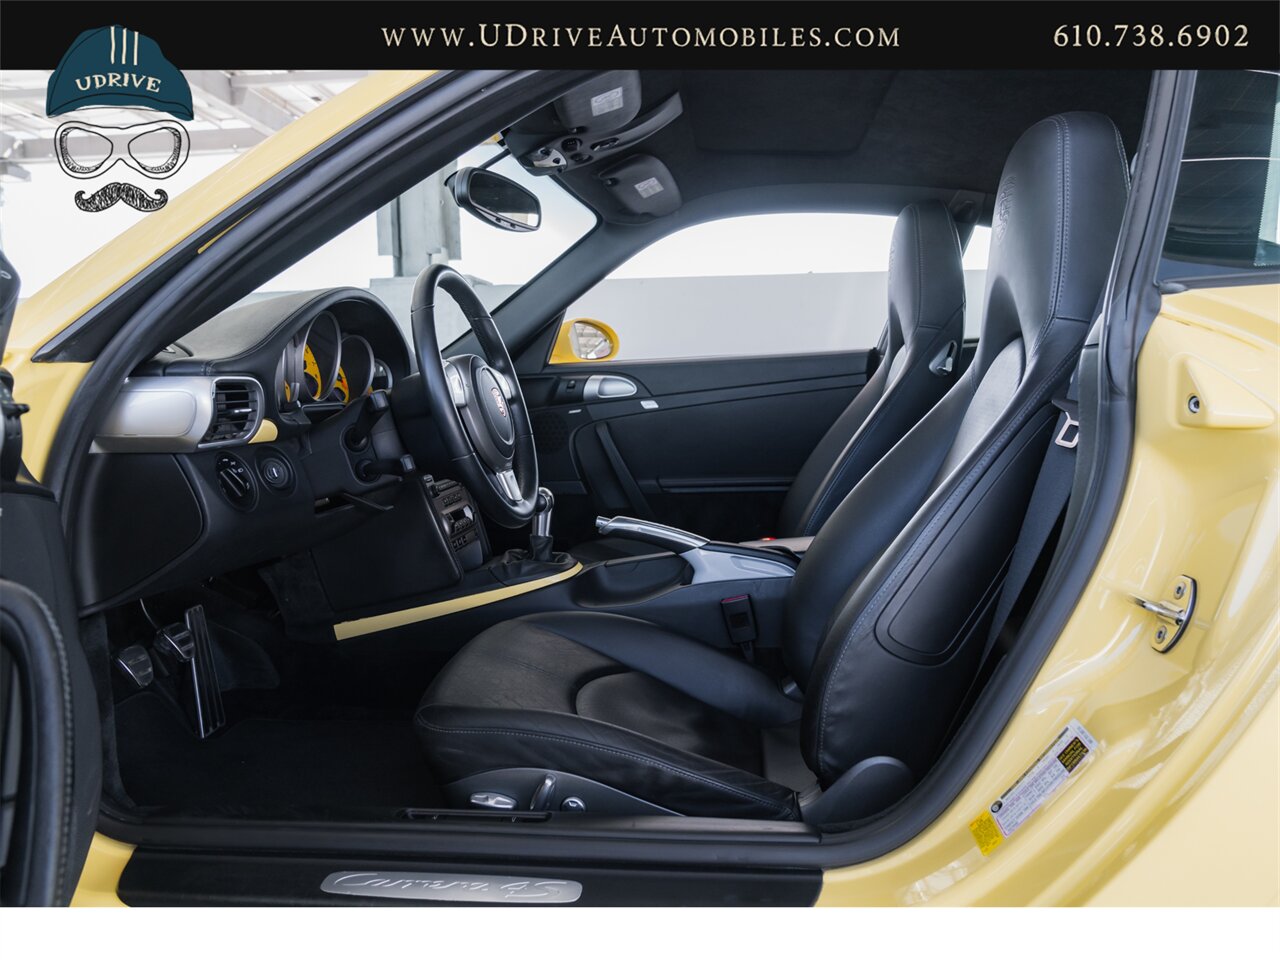 2007 Porsche 911 Carrera 4S 997 C4S Paint To Sample Pastel Yellow  6 Speed Sport Chrono Full Leather Yellow Gauges - Photo 28 - West Chester, PA 19382